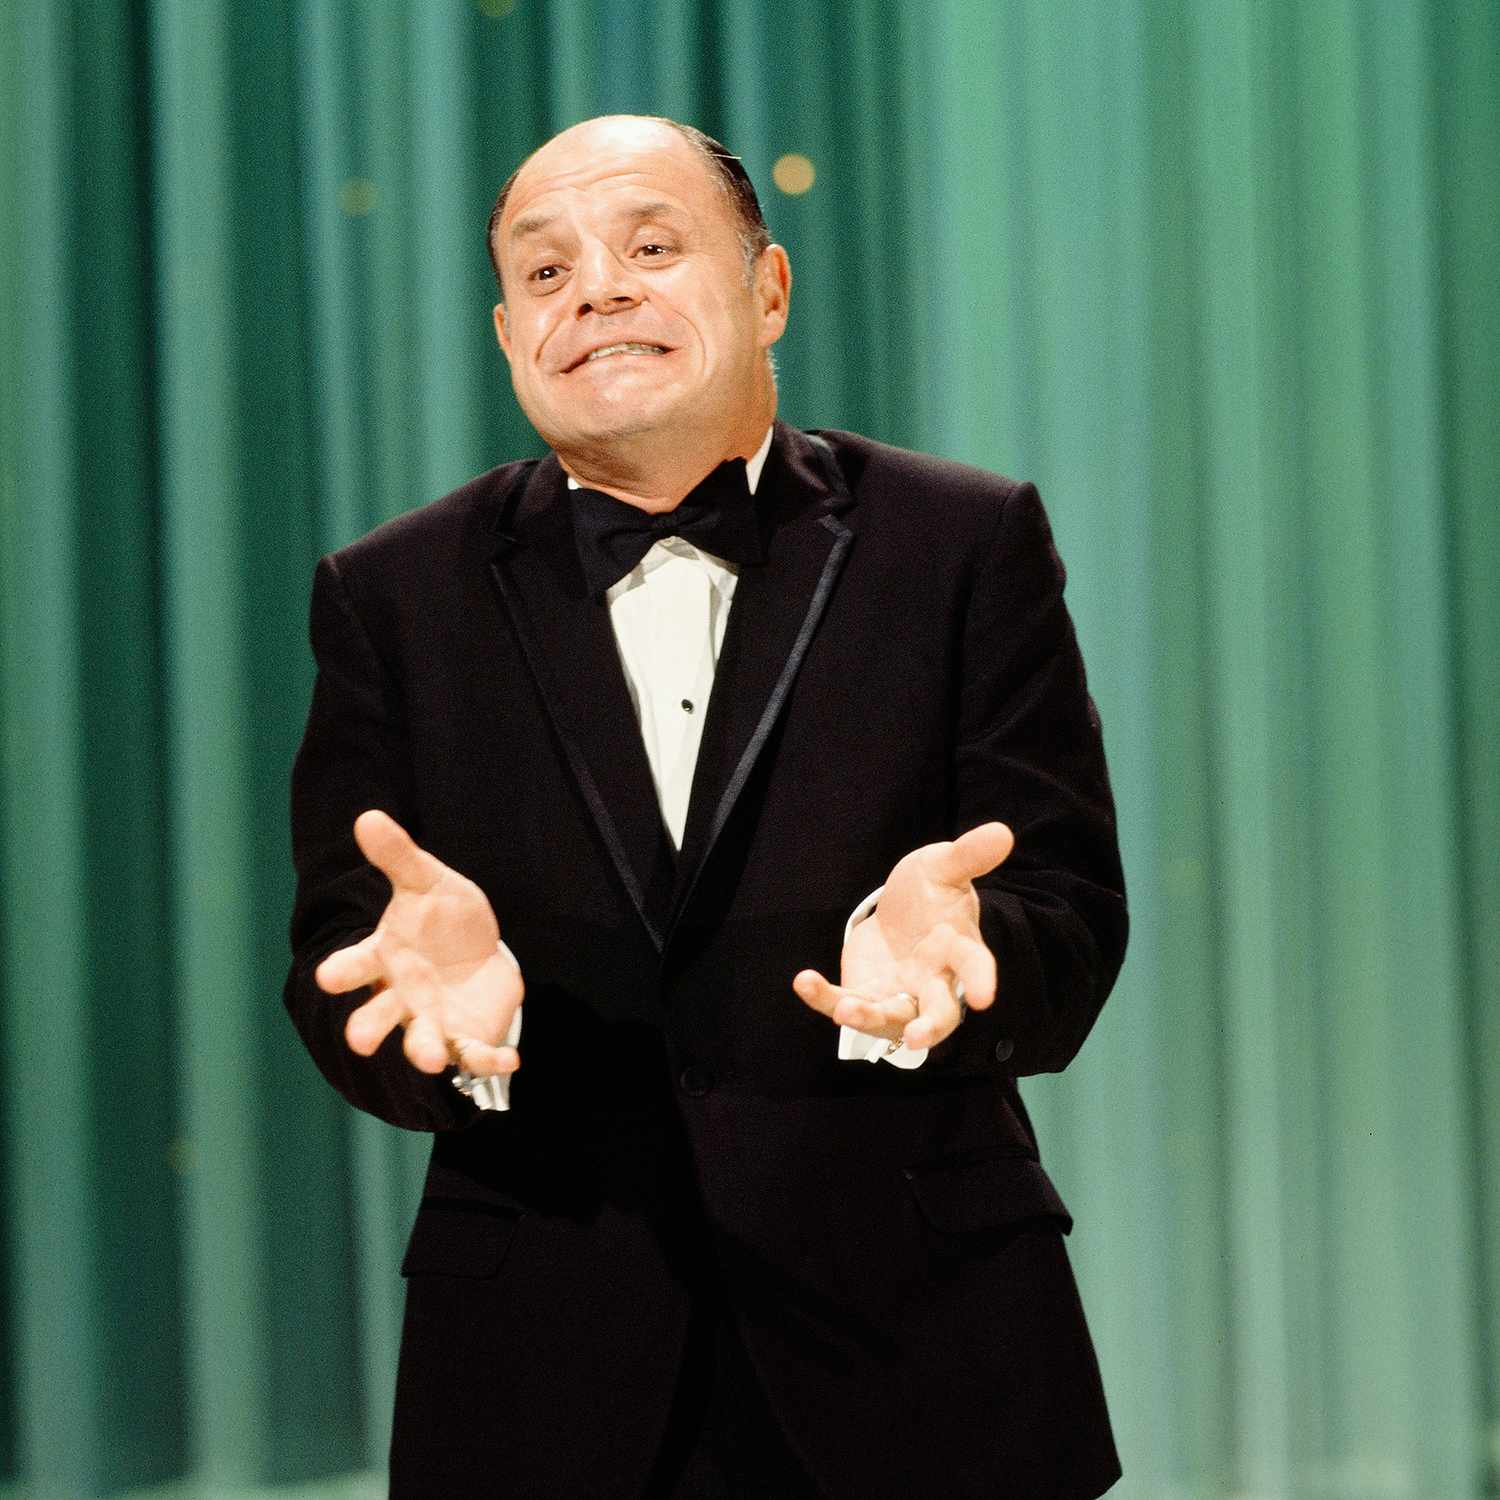 Don Rickles Through the Years